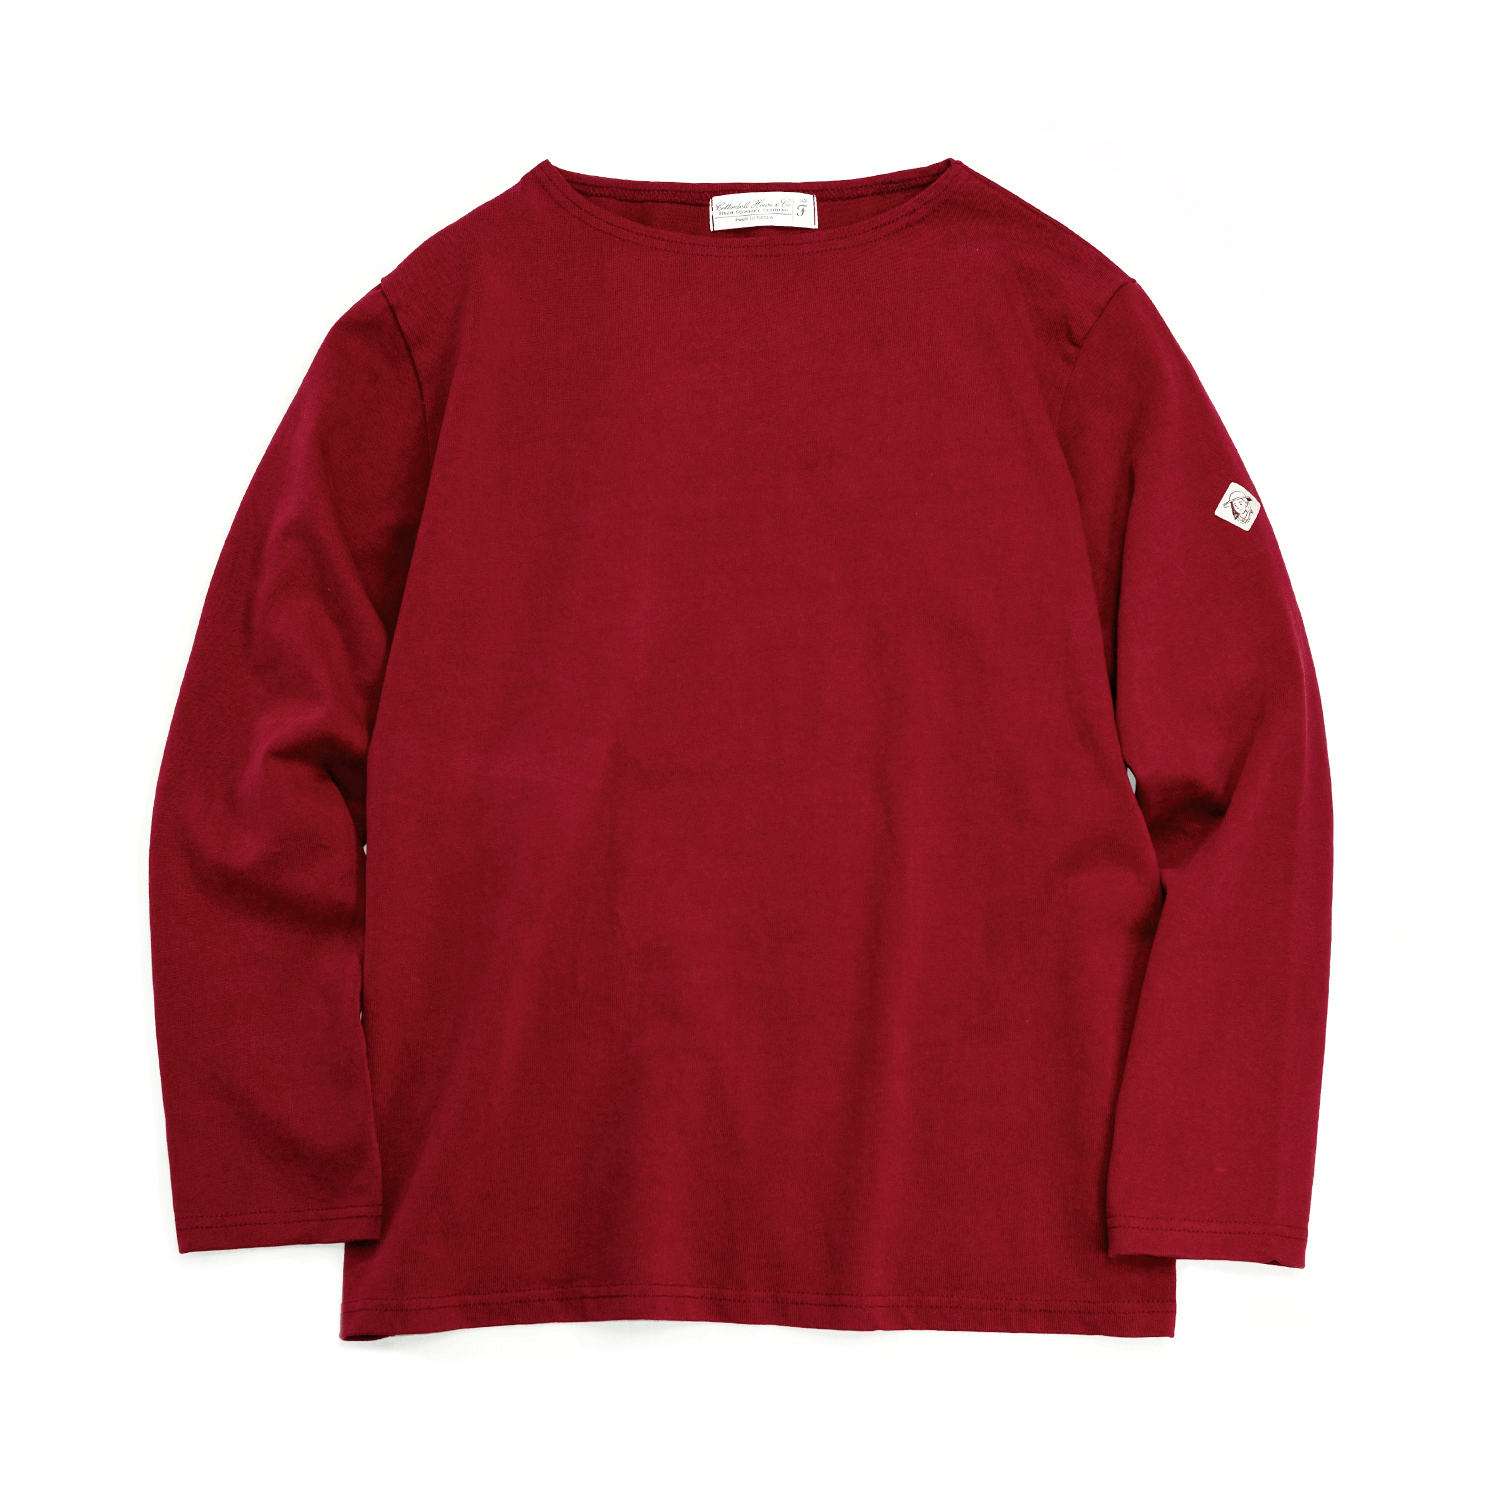 Boat Neck Tee Shirts - Red